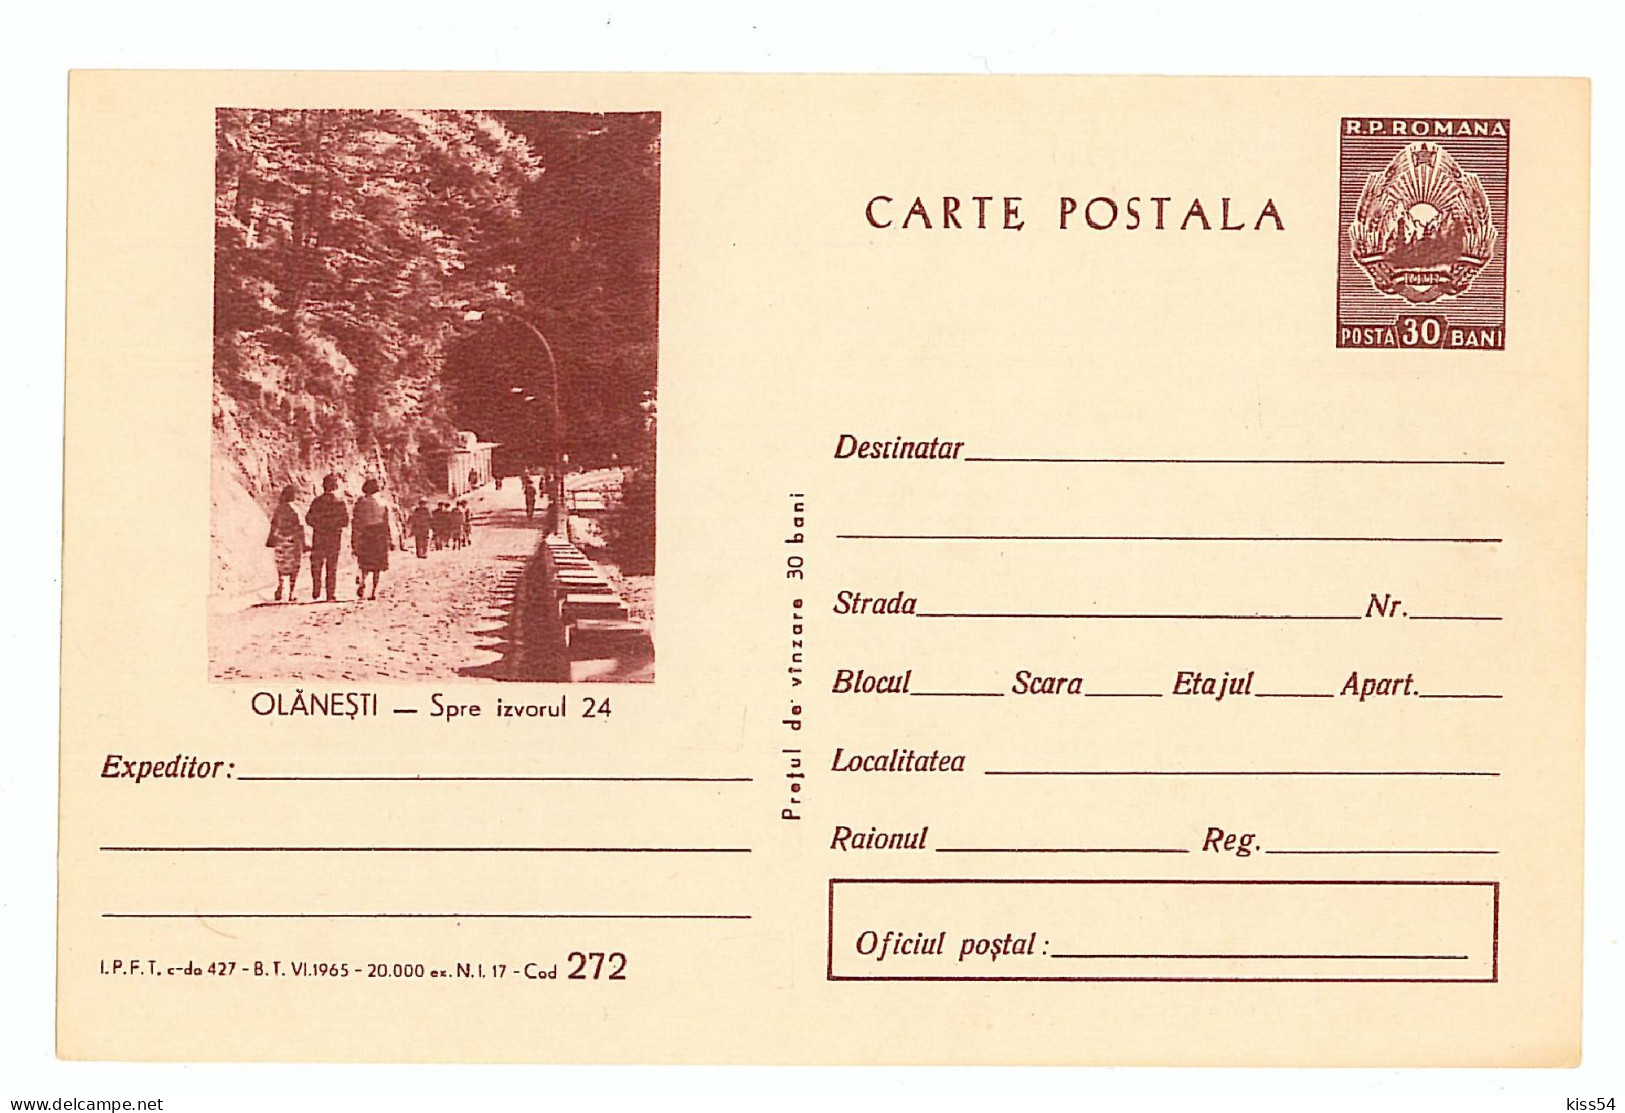 IP 65 A - 272 TOURISM, OLANESTI To The Mineral Springs, Romania - Stationery - Unused - 1965 - Postal Stationery